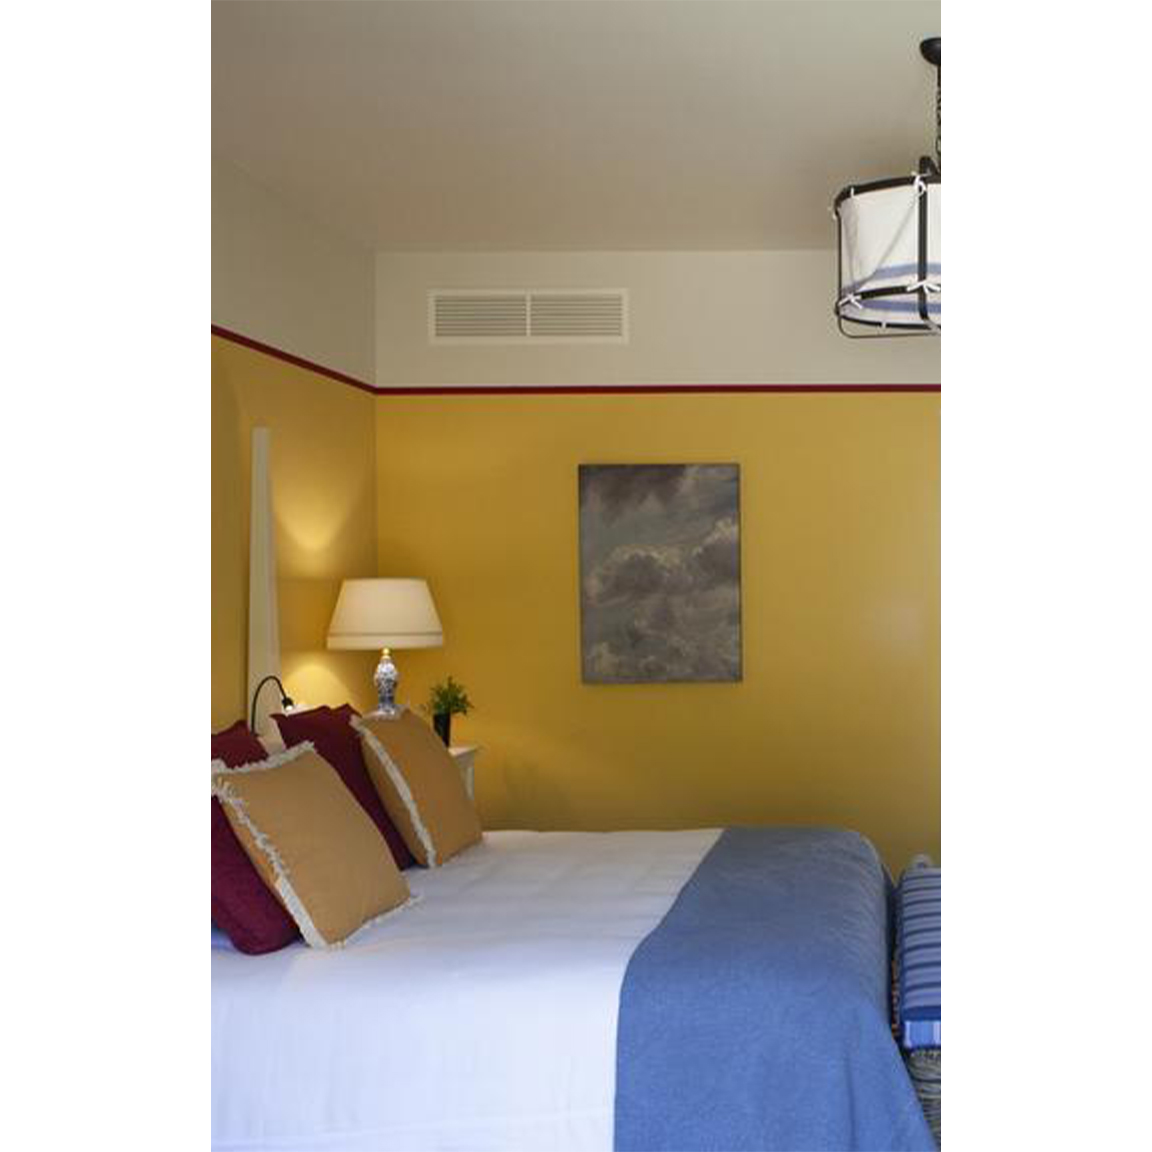 yellow wall with red stripe inside bedroom